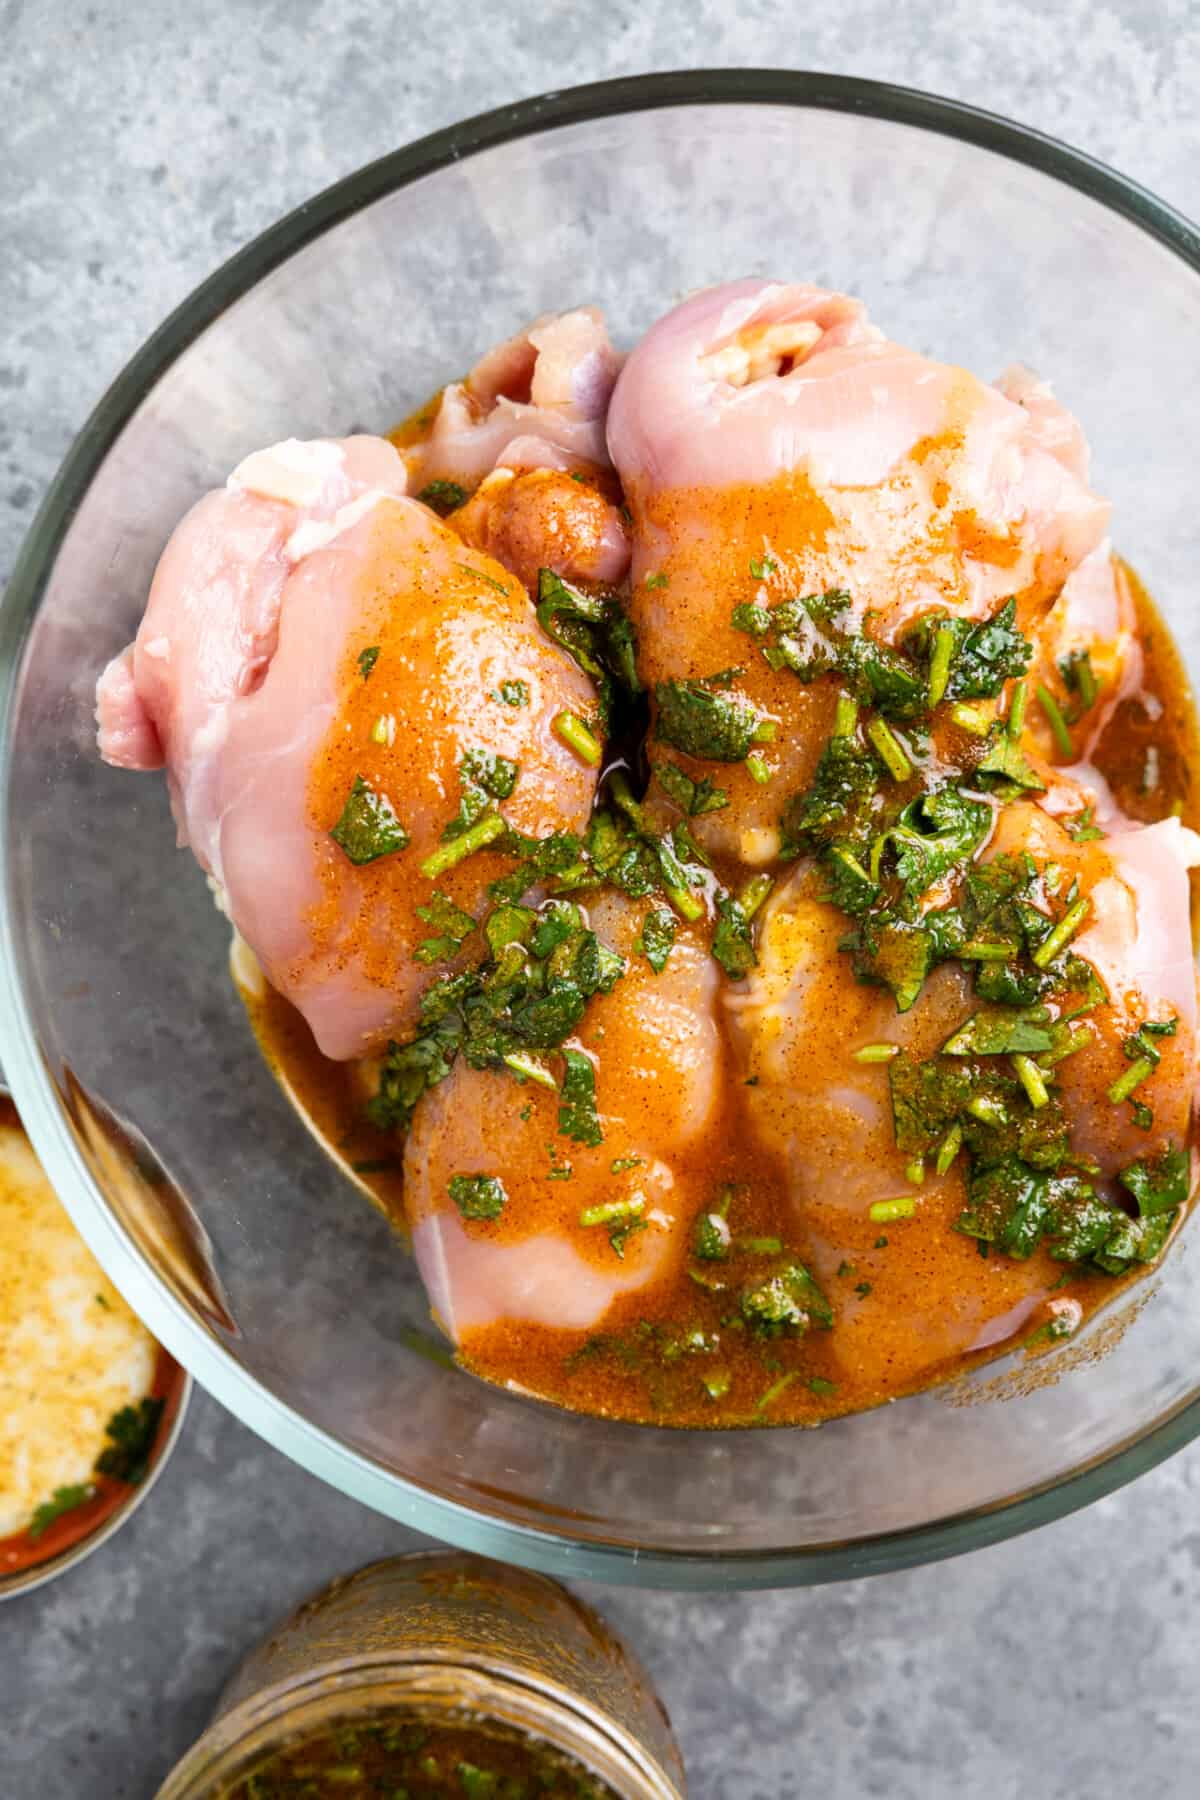 Marinade poured over the top of boneless, skinless chicken thighs in a glass bowl.